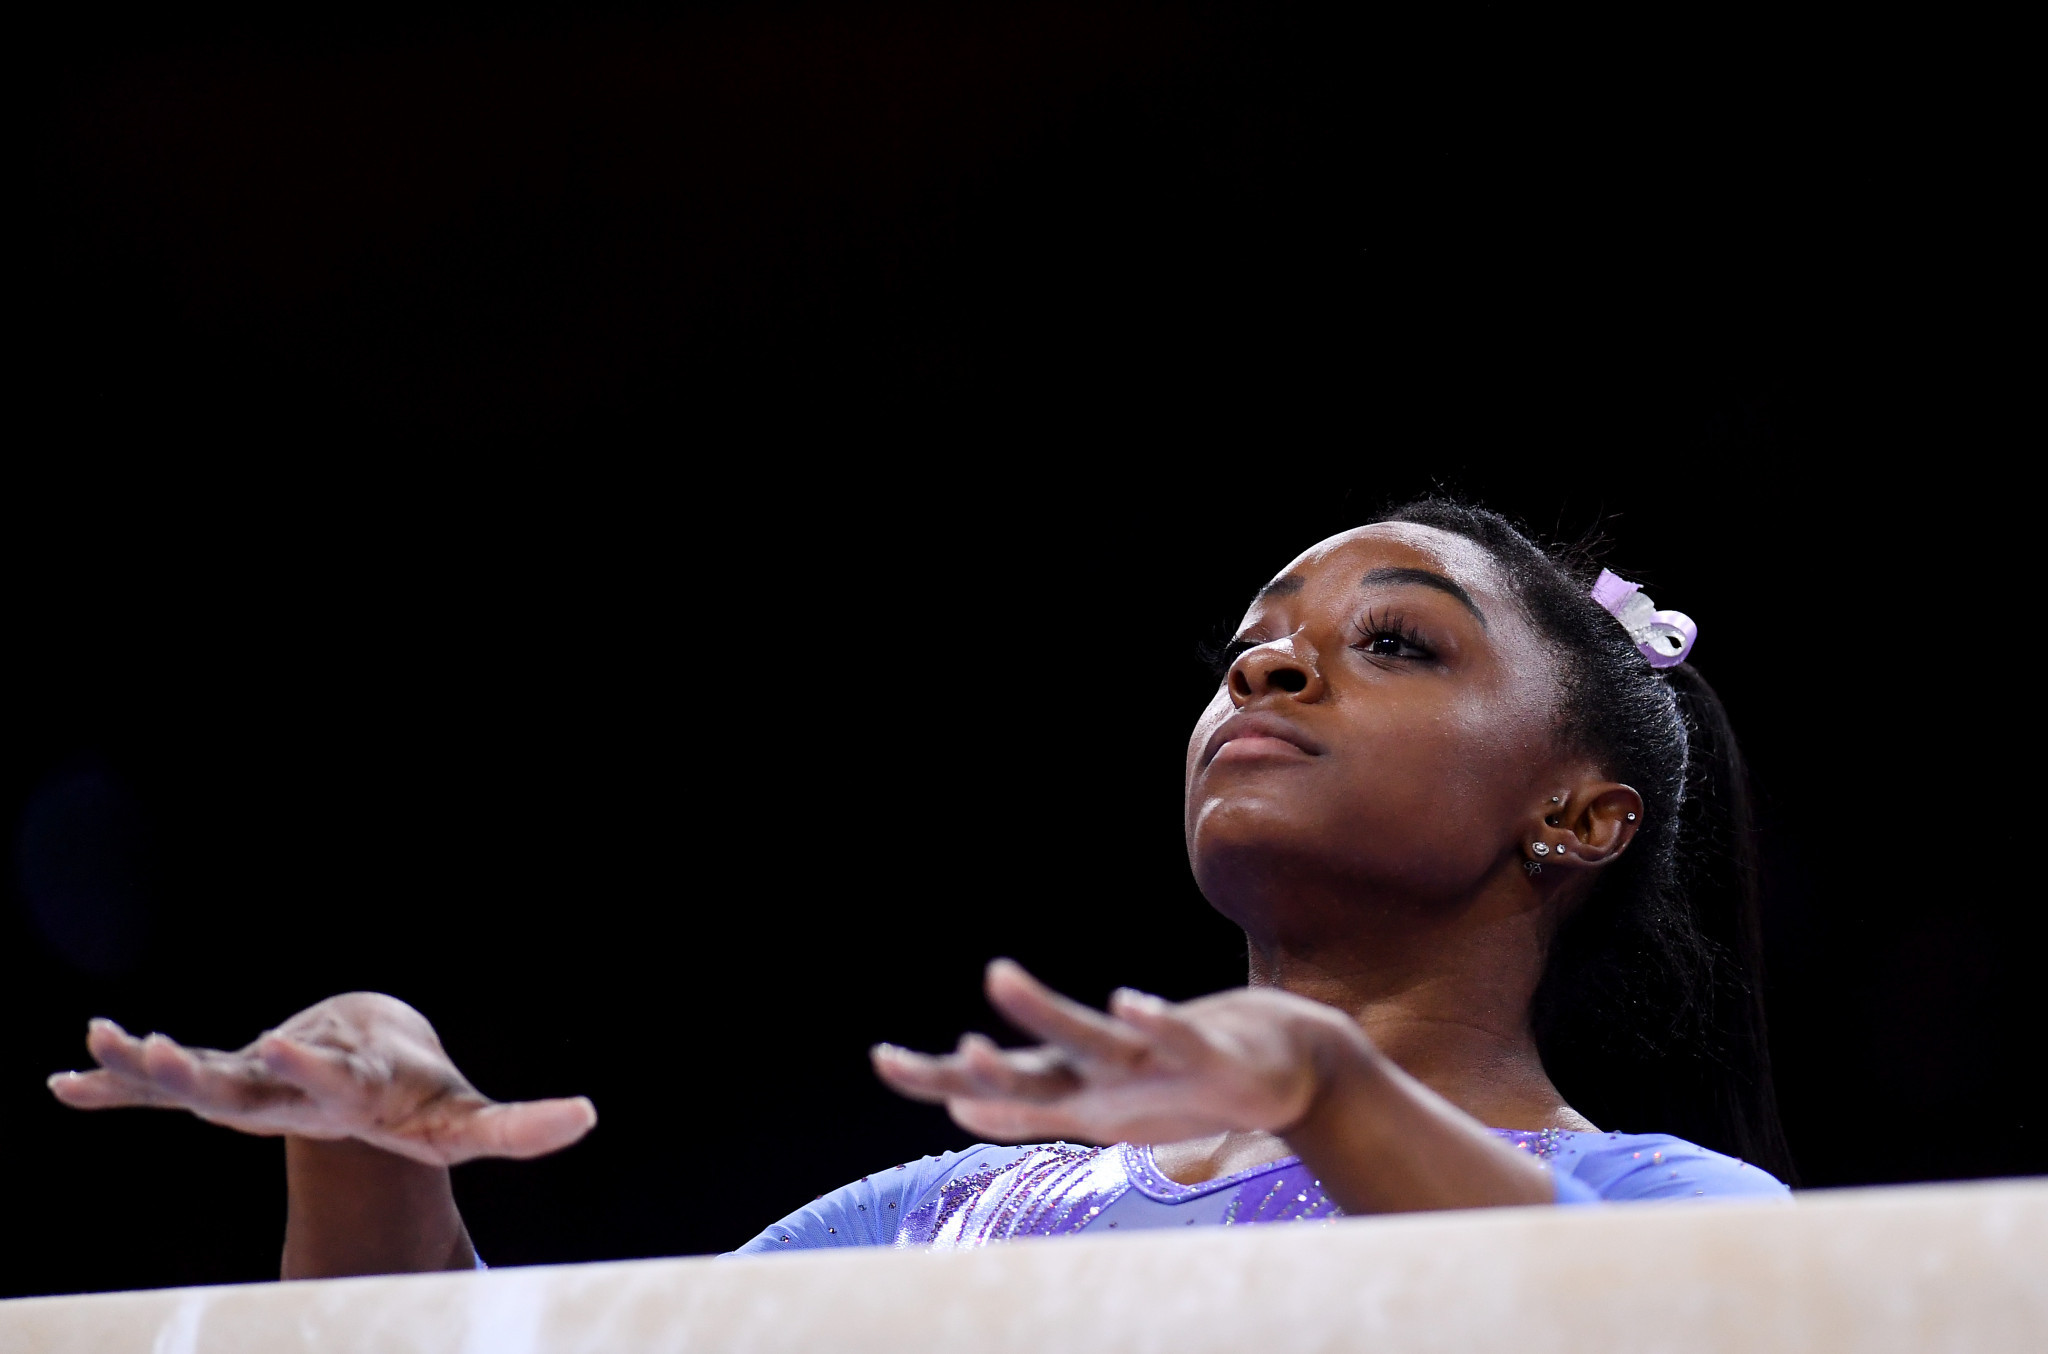 Simone Biles will hope to add to her four Olympic gold medals at Tokyo 2020 ©Getty Images